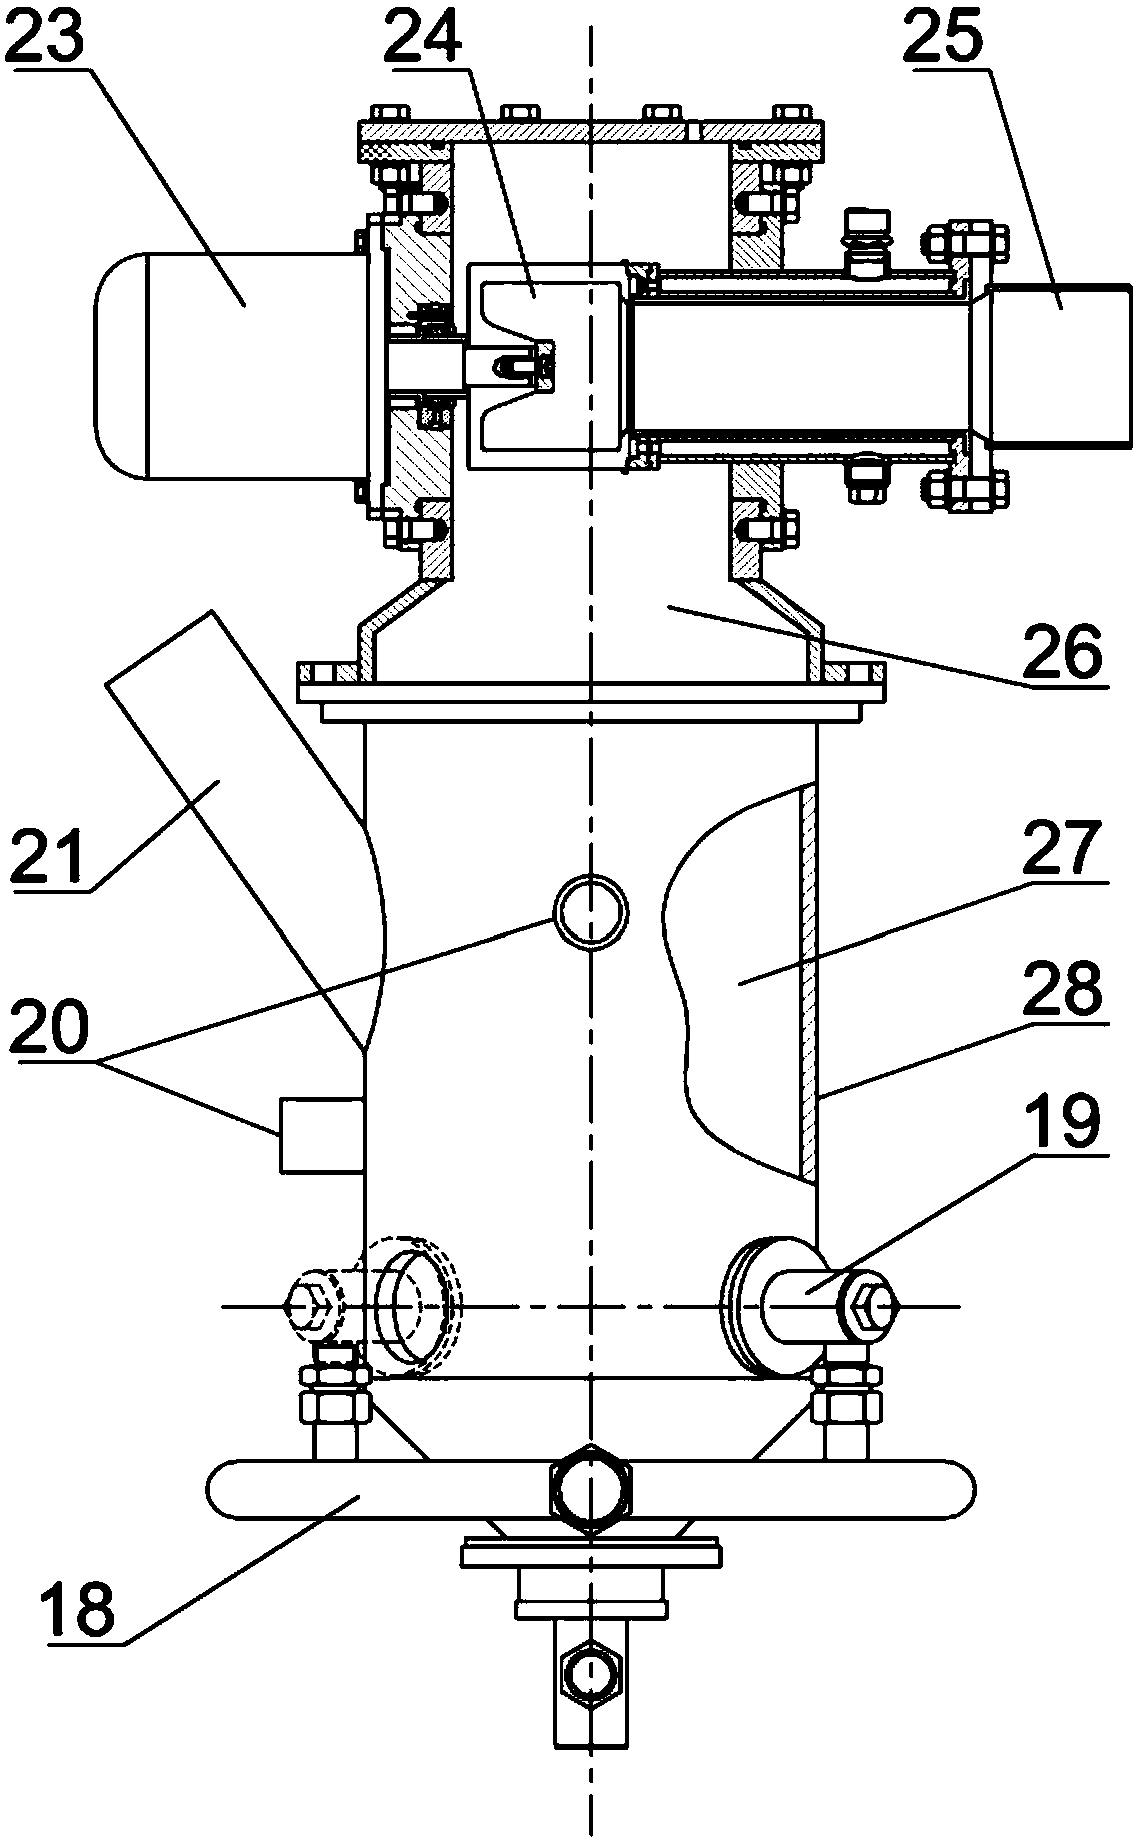 Double-air supply airflow mill